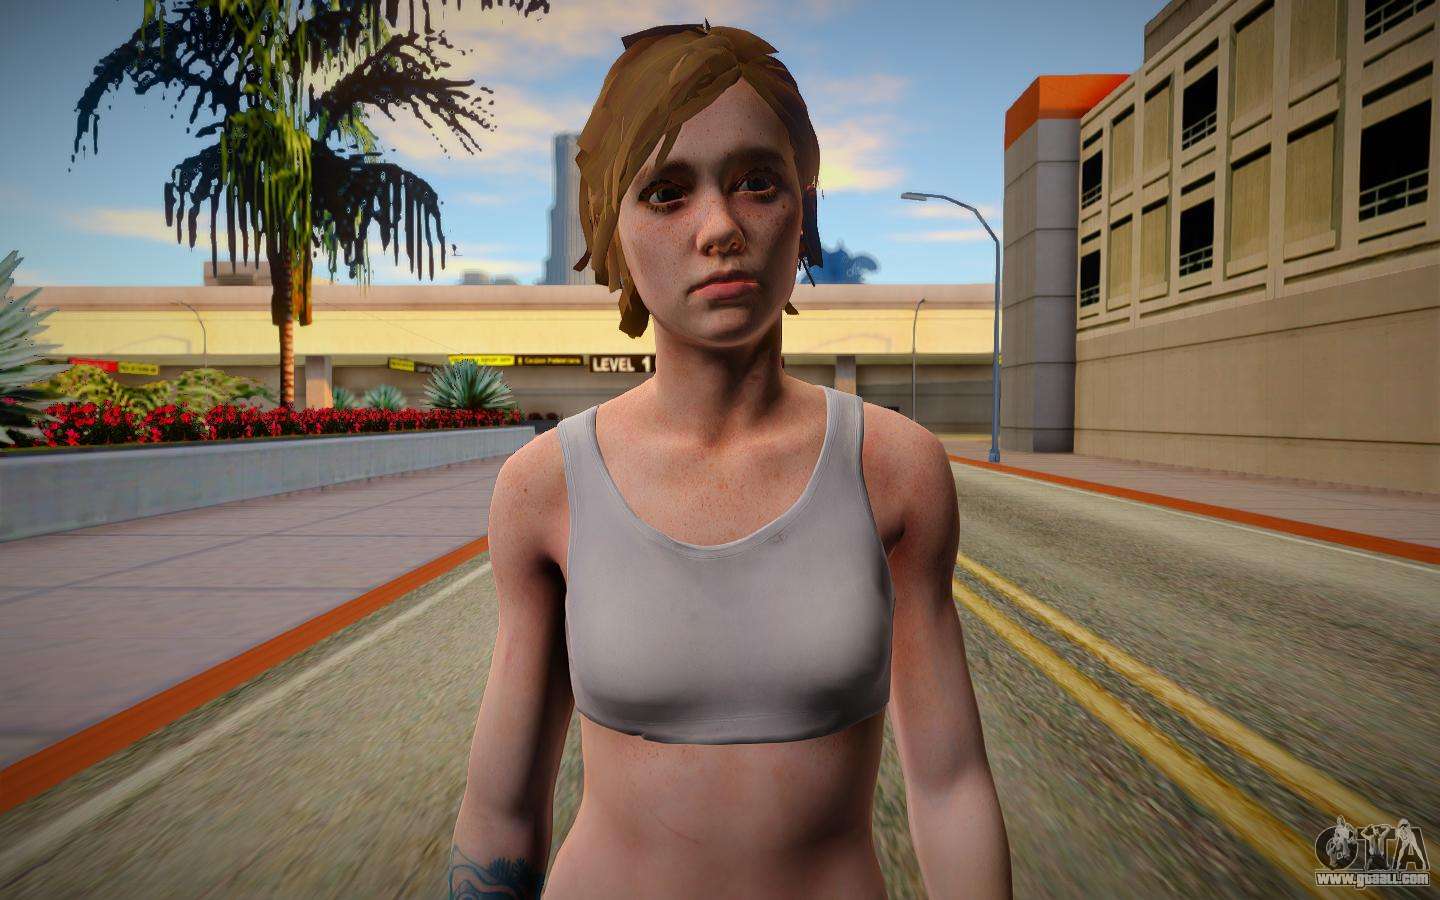 Download Ellie Williams from The Last of Us 2 for GTA San Andreas